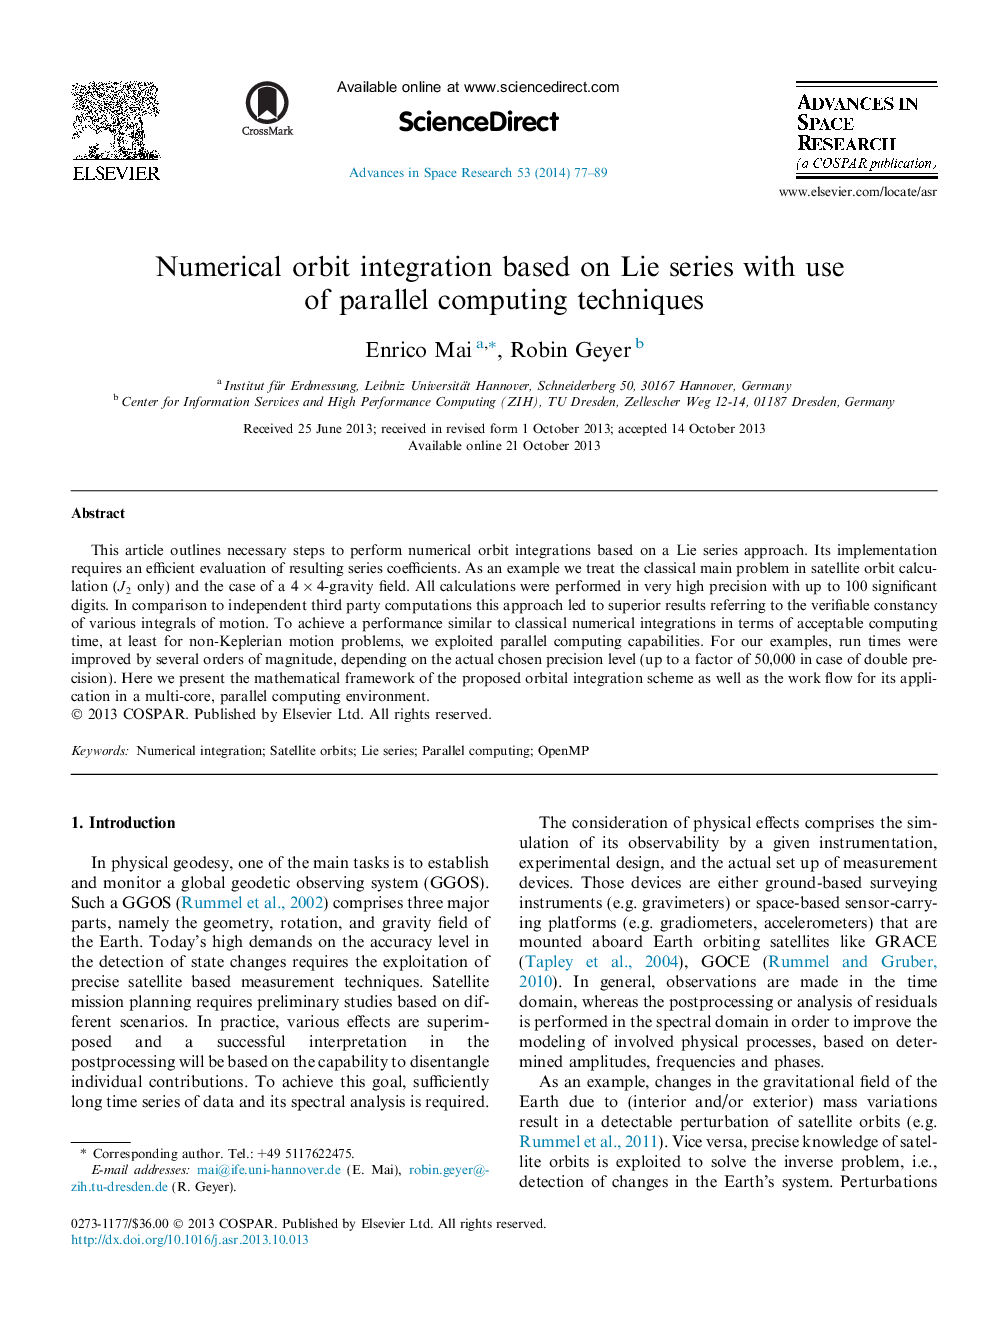 Numerical orbit integration based on Lie series with use of parallel computing techniques